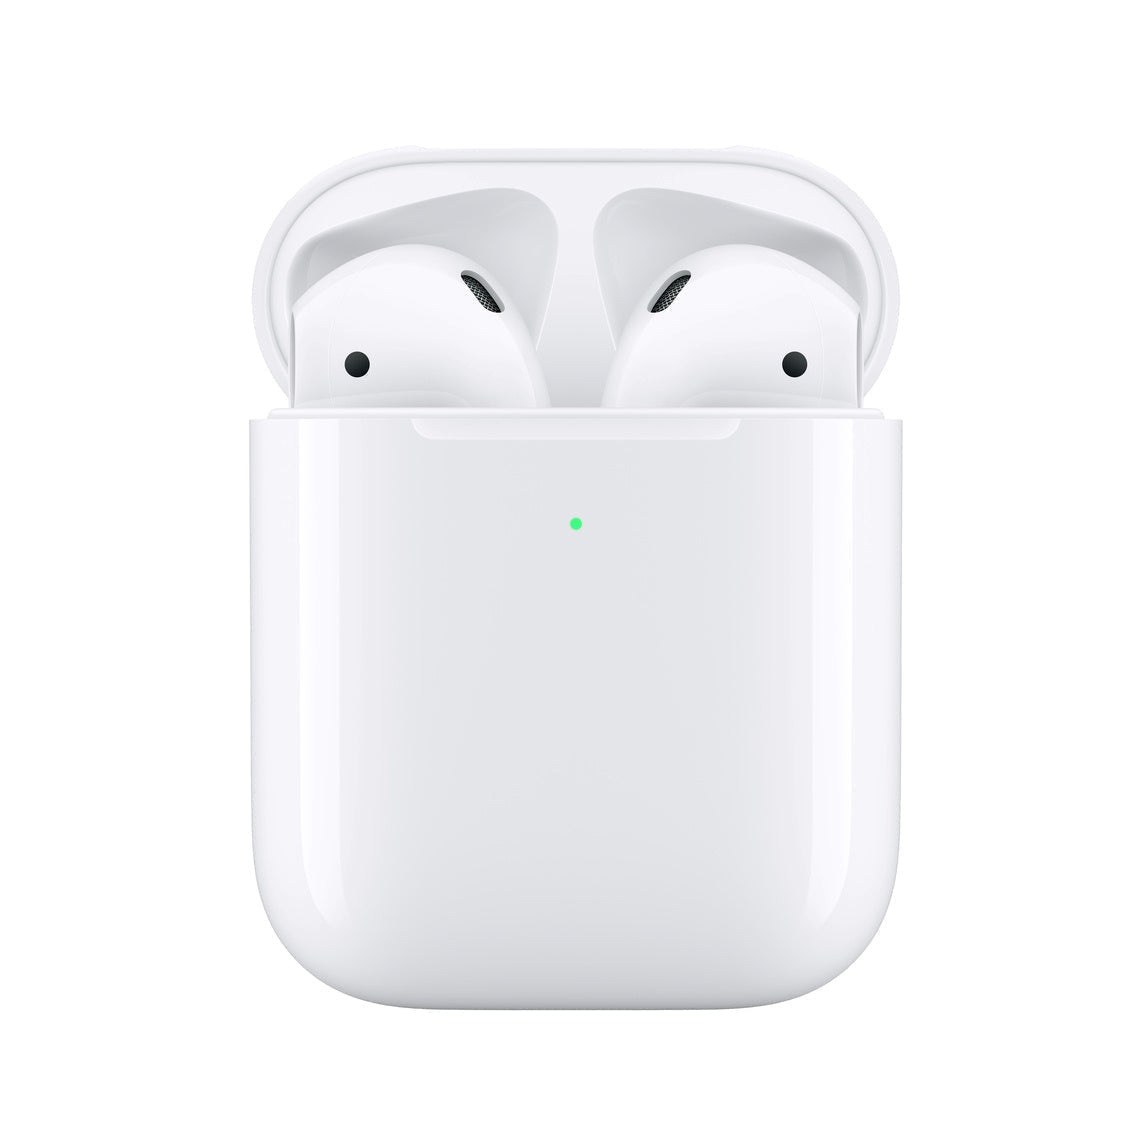 Vat Testing Product iPhone EarPods adaptable for iPhone 12, iPhone 13 mini, iPhone 13 Pro